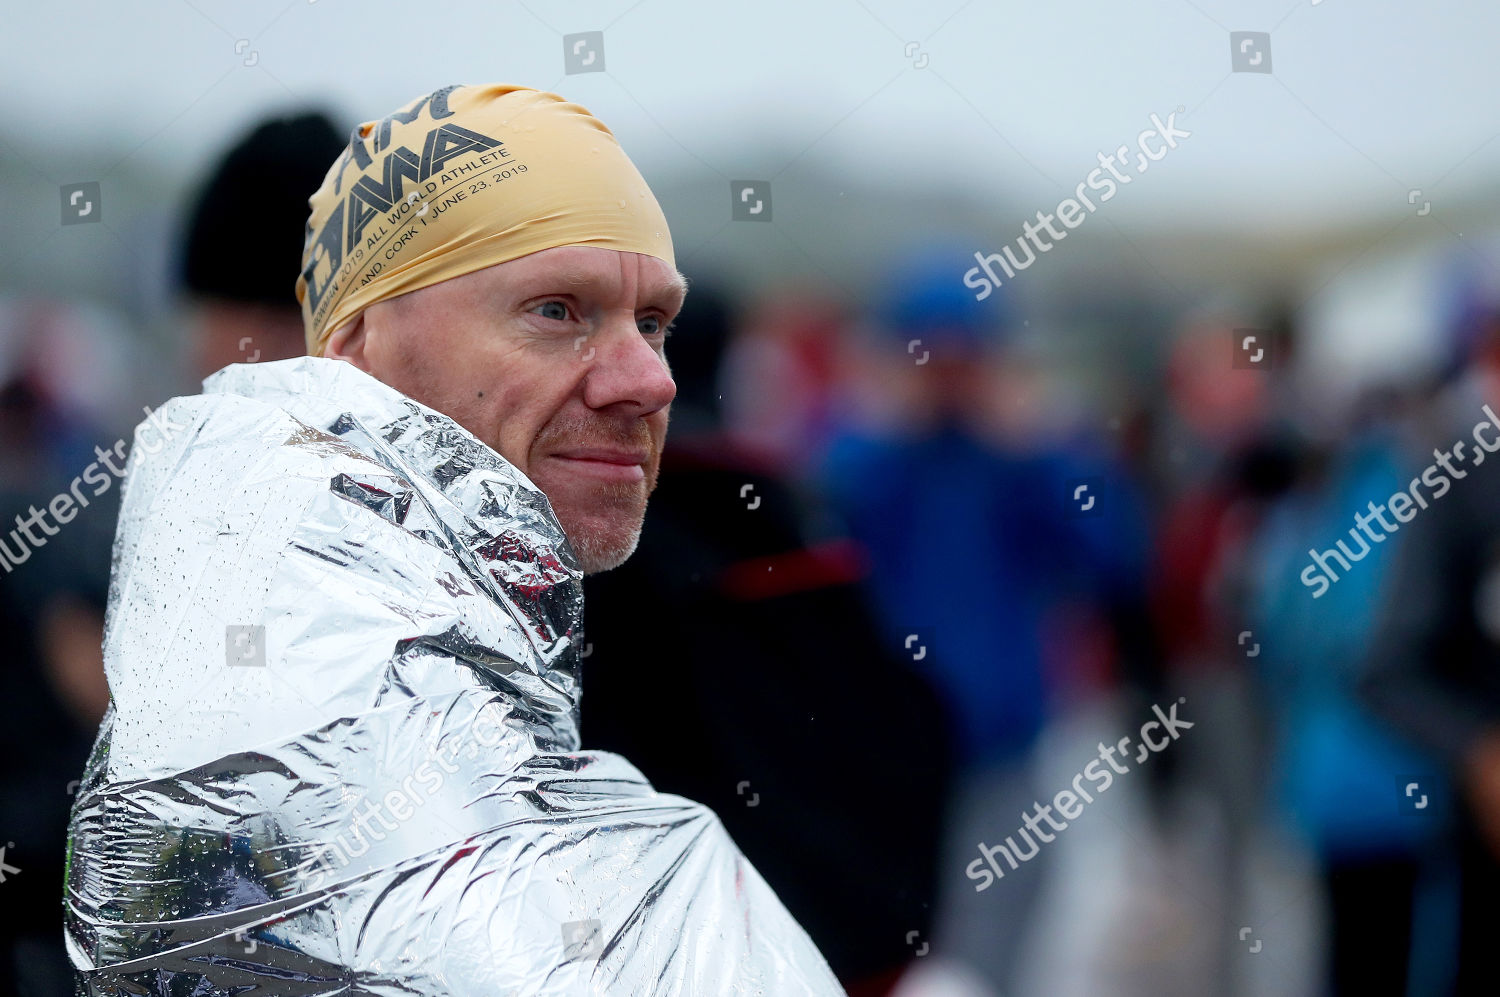 Paul Tuck attempts stay warm after swim Editorial Stock Photo ...